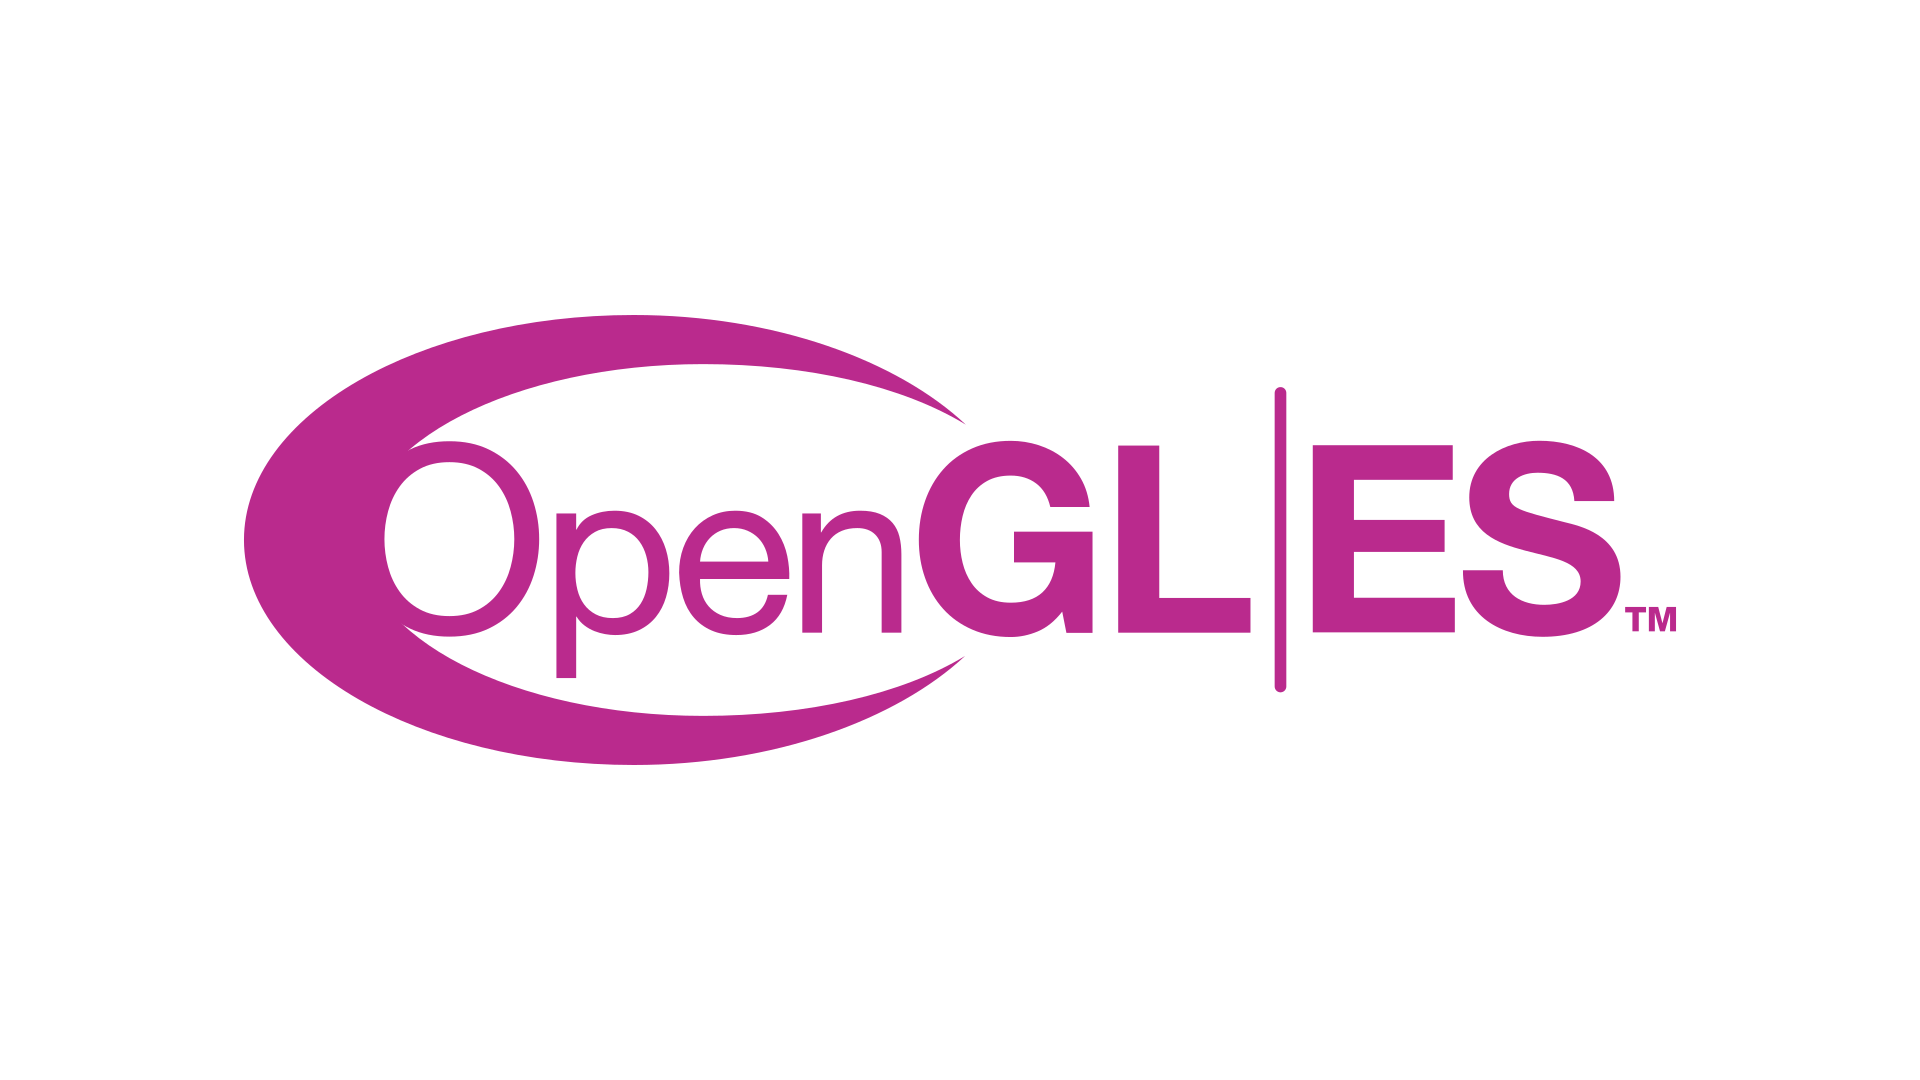 difference between opengl es 2.0 and 3.0